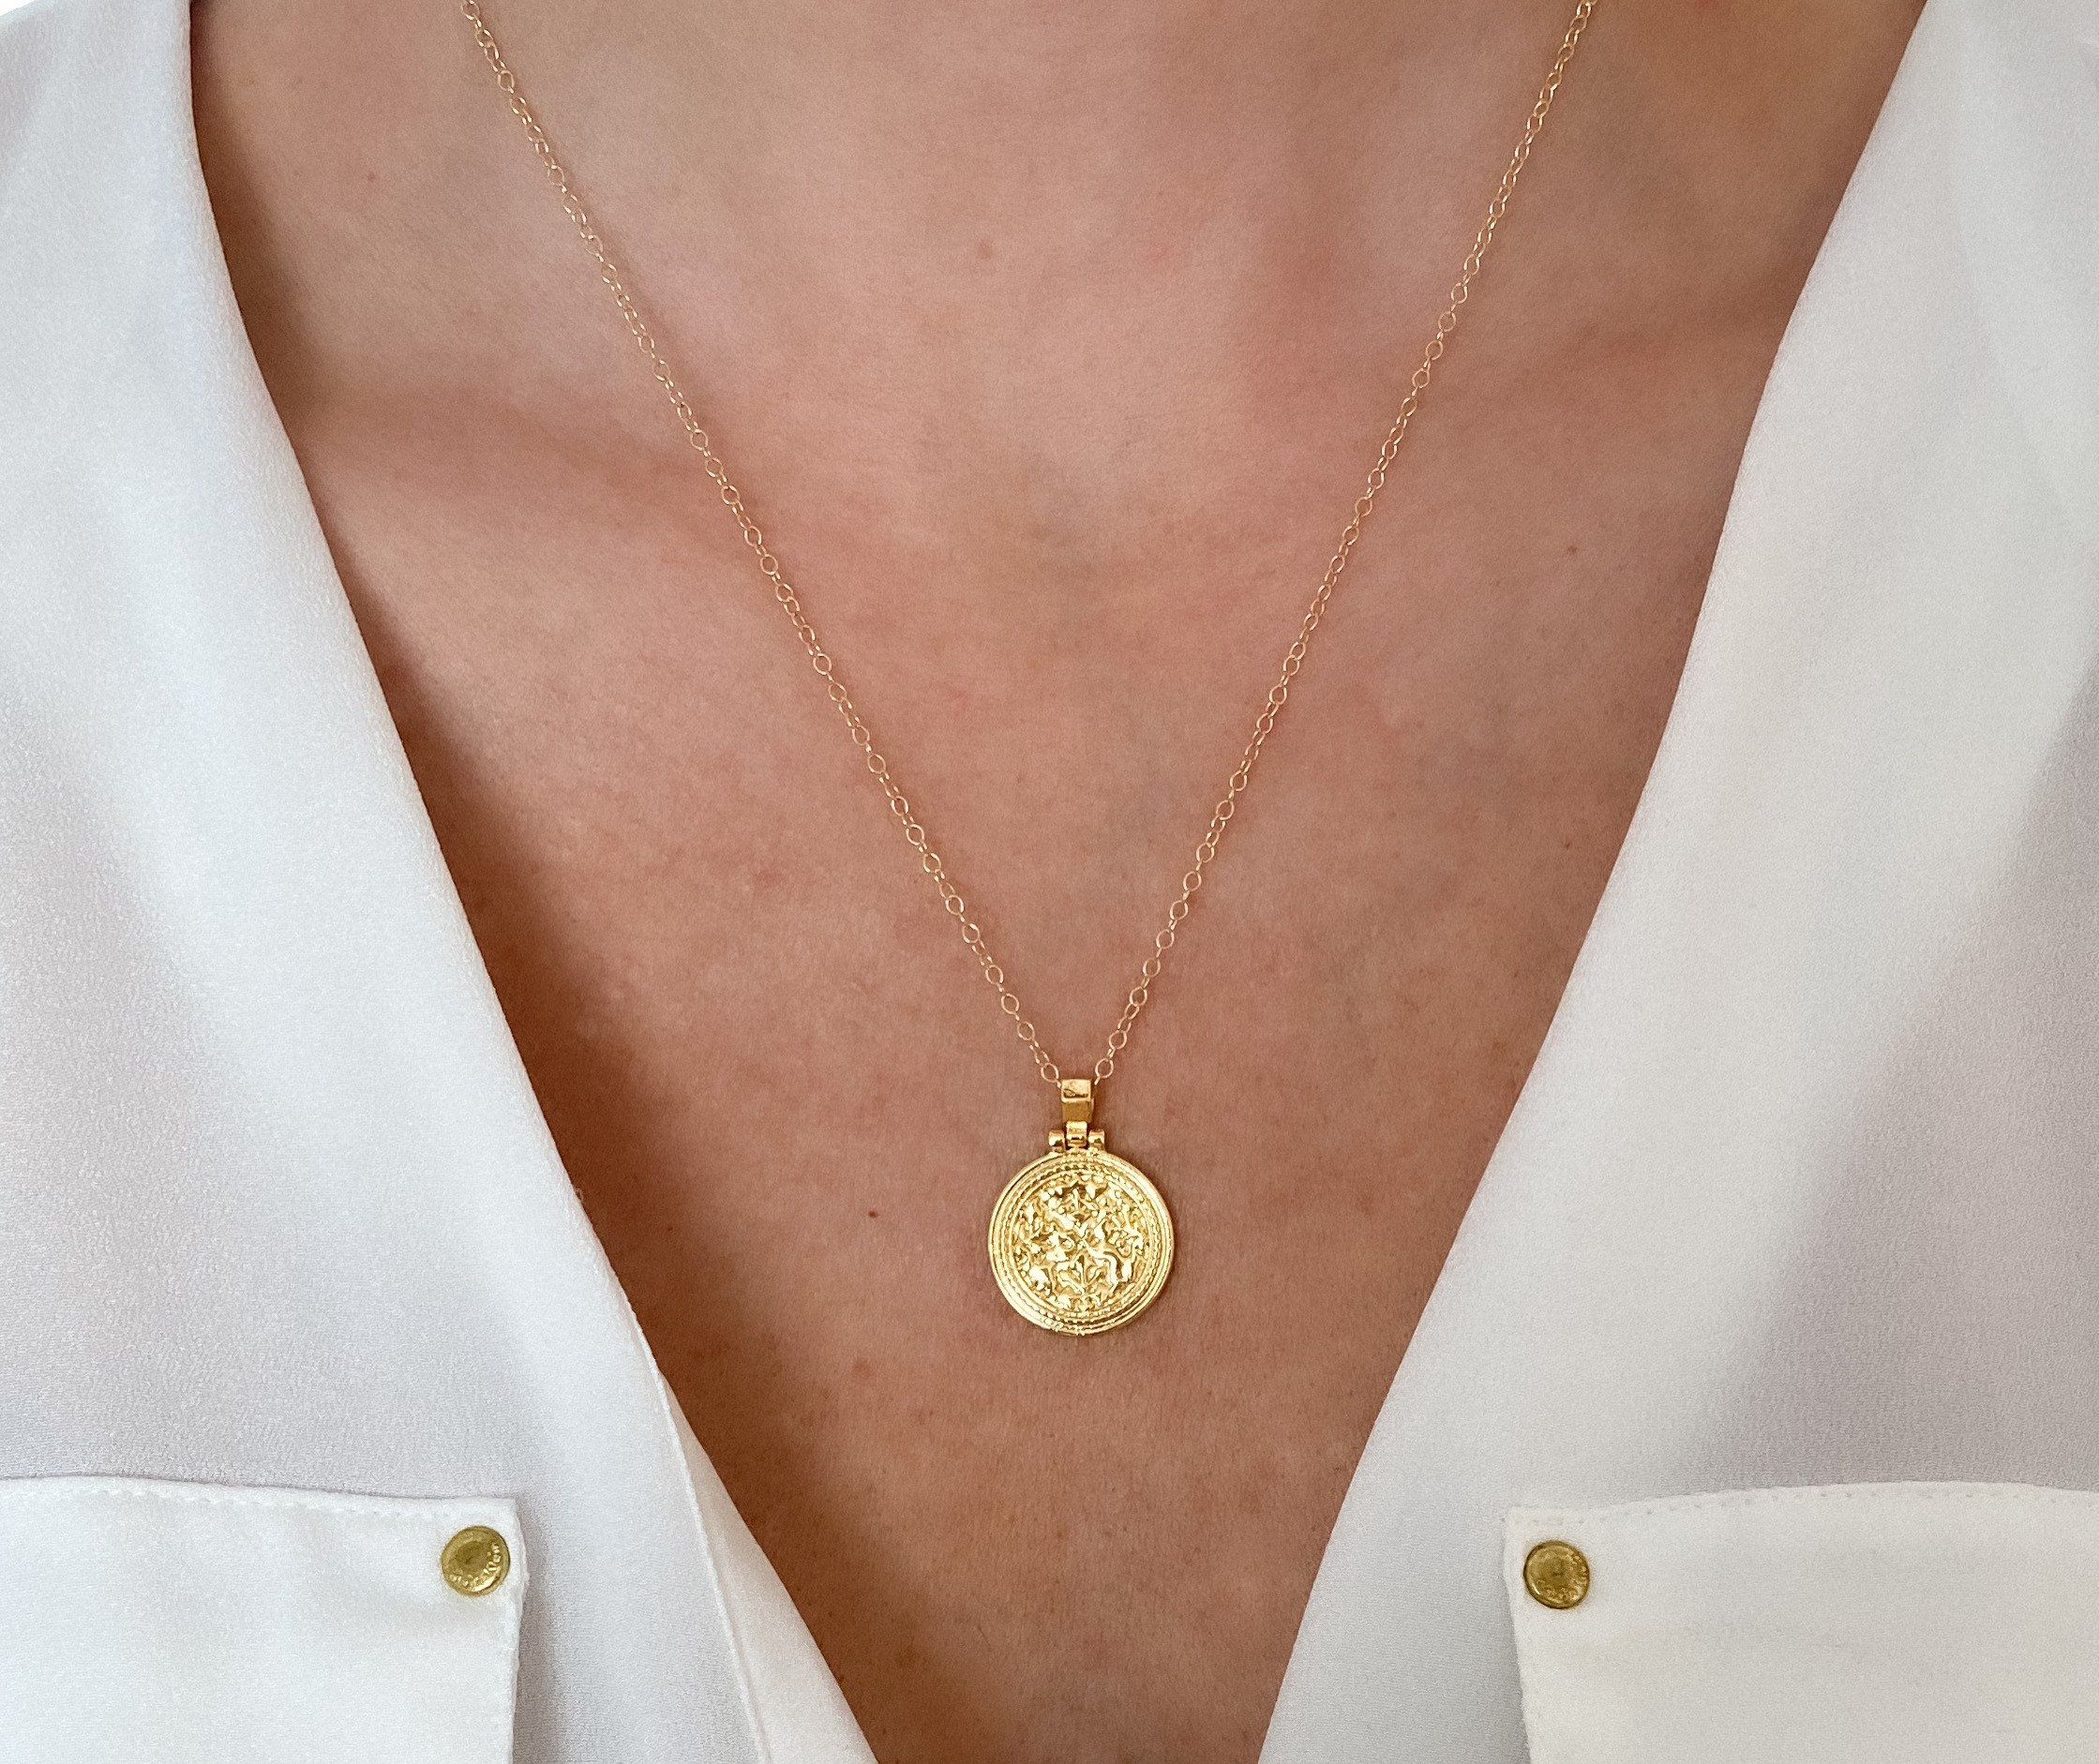 Gold Filled Necklace, Coin Necklace, Medallion Necklace, Necklaces for  Women, Gifts for Her, Necklaces, Dainty Necklace, Jewelry, Gift 